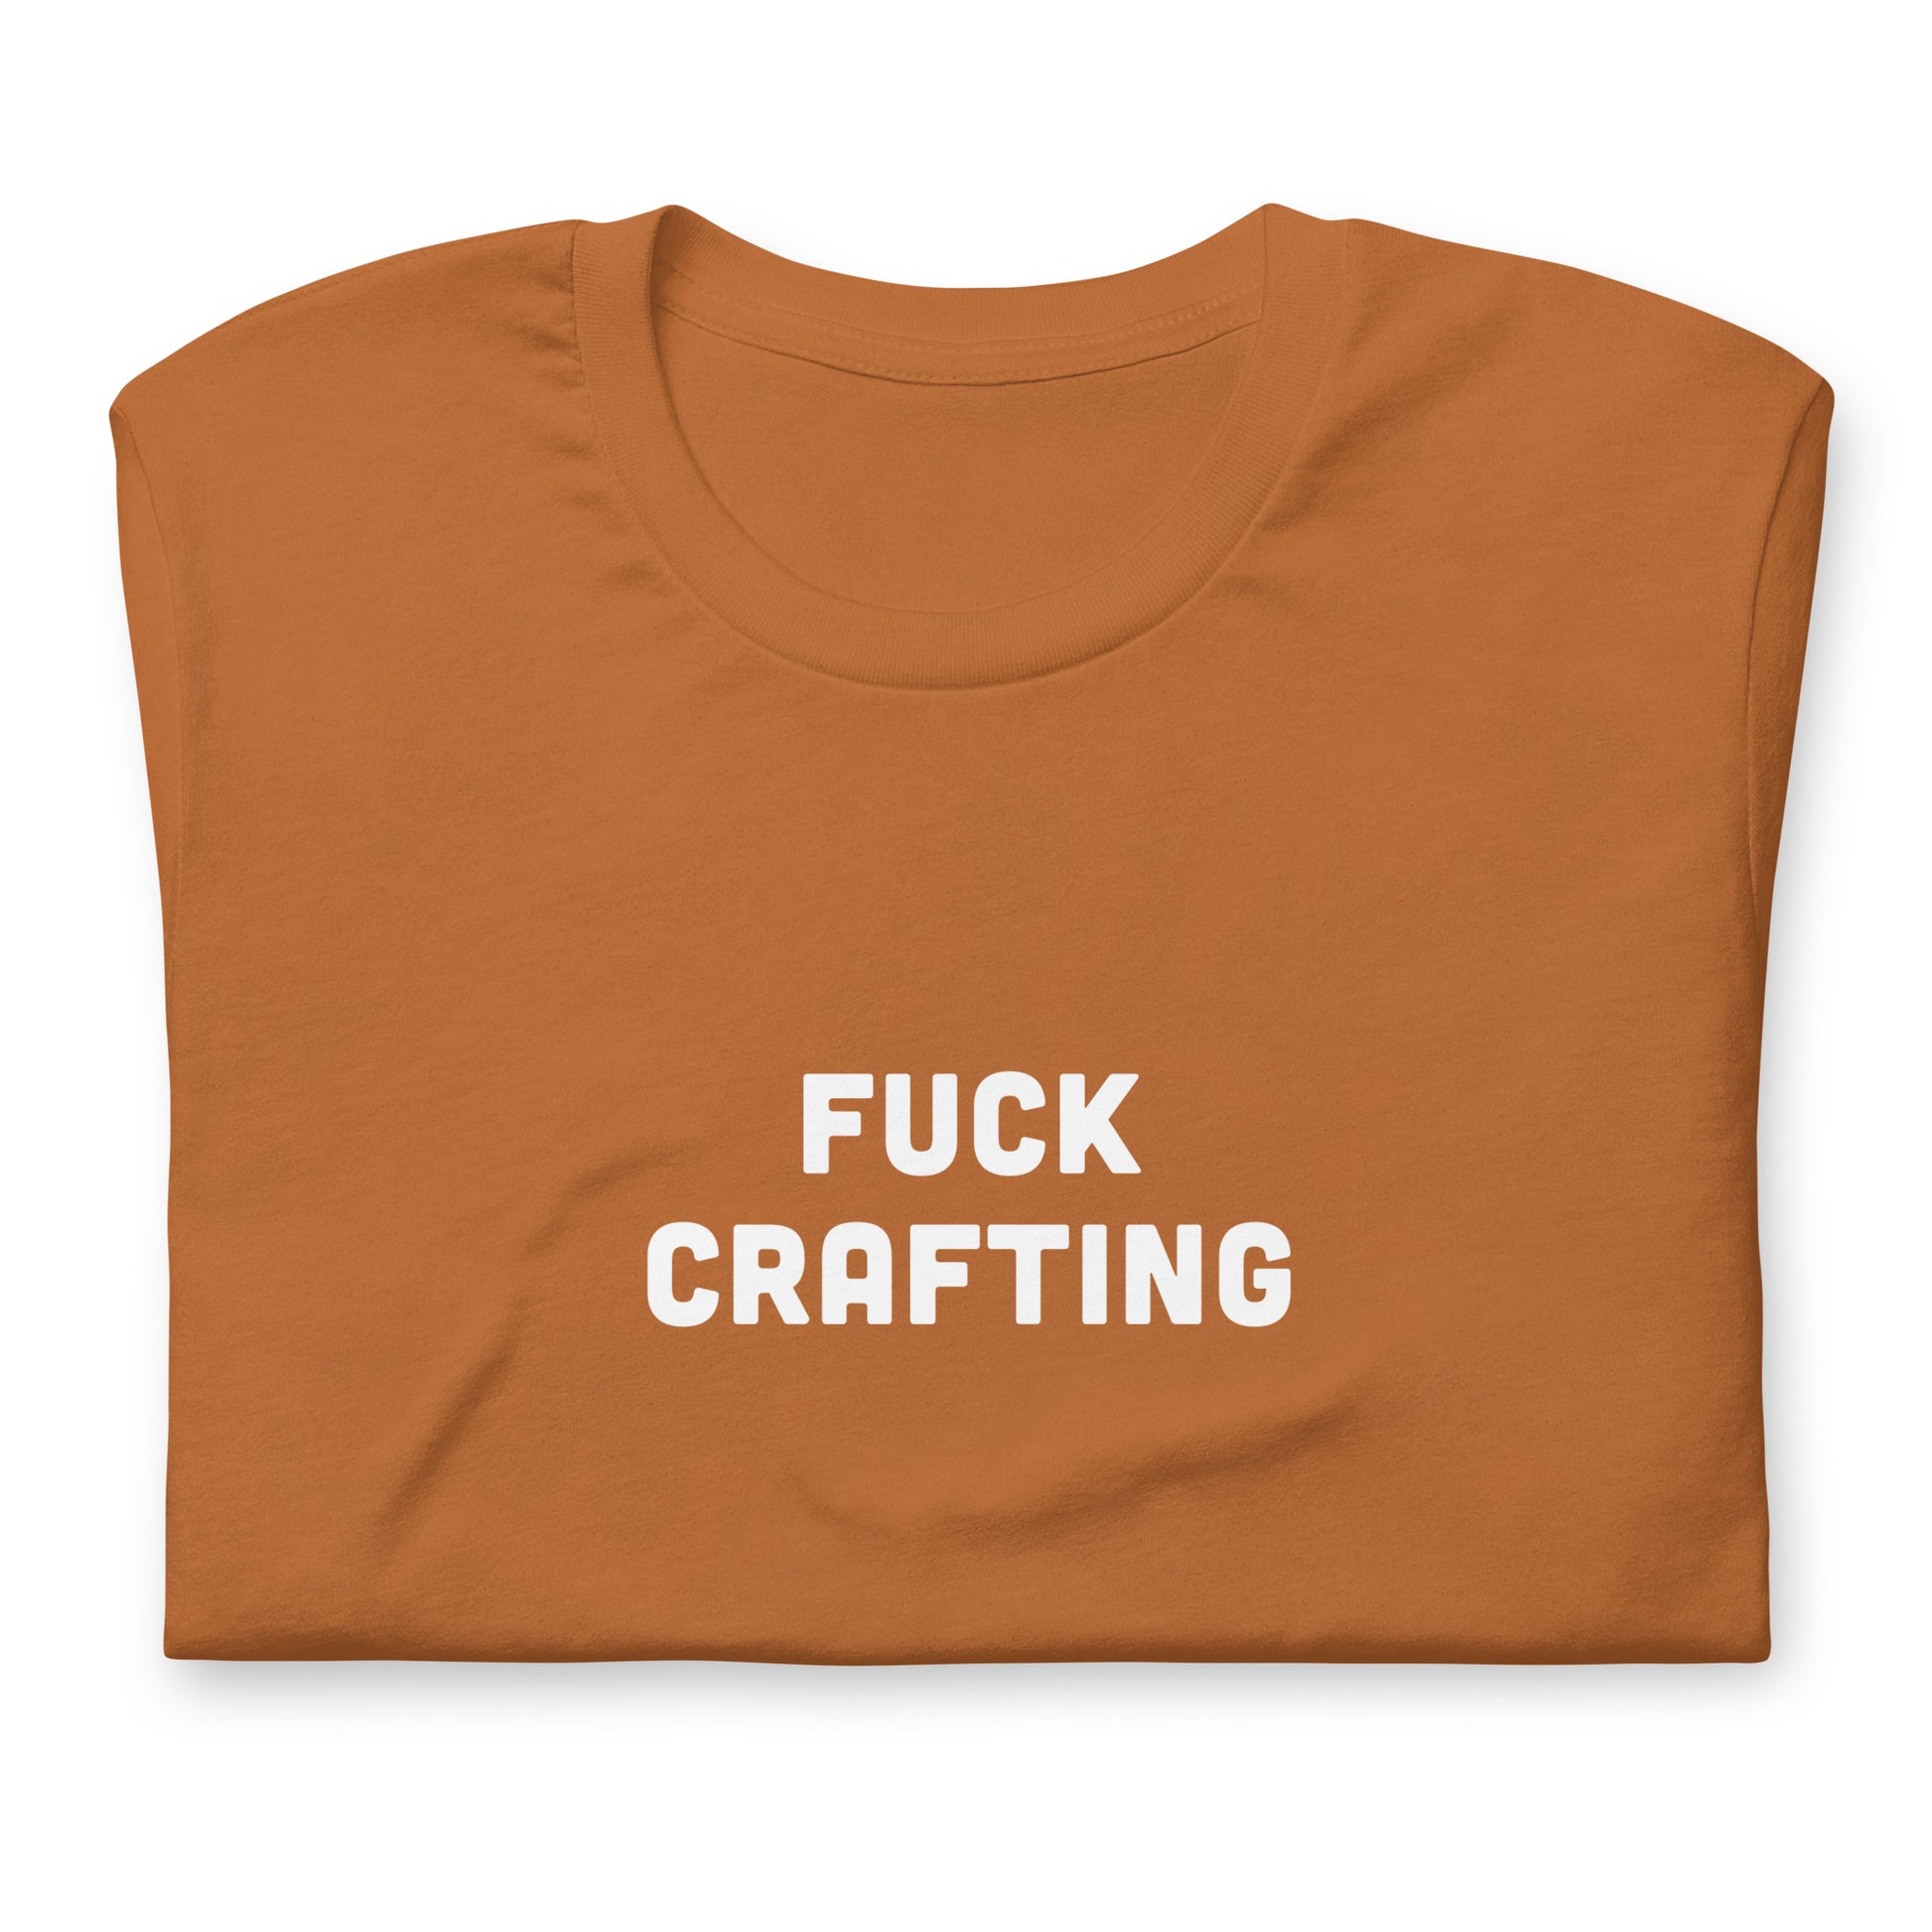 Fuck Crafting T-Shirt Size XL Color Navy